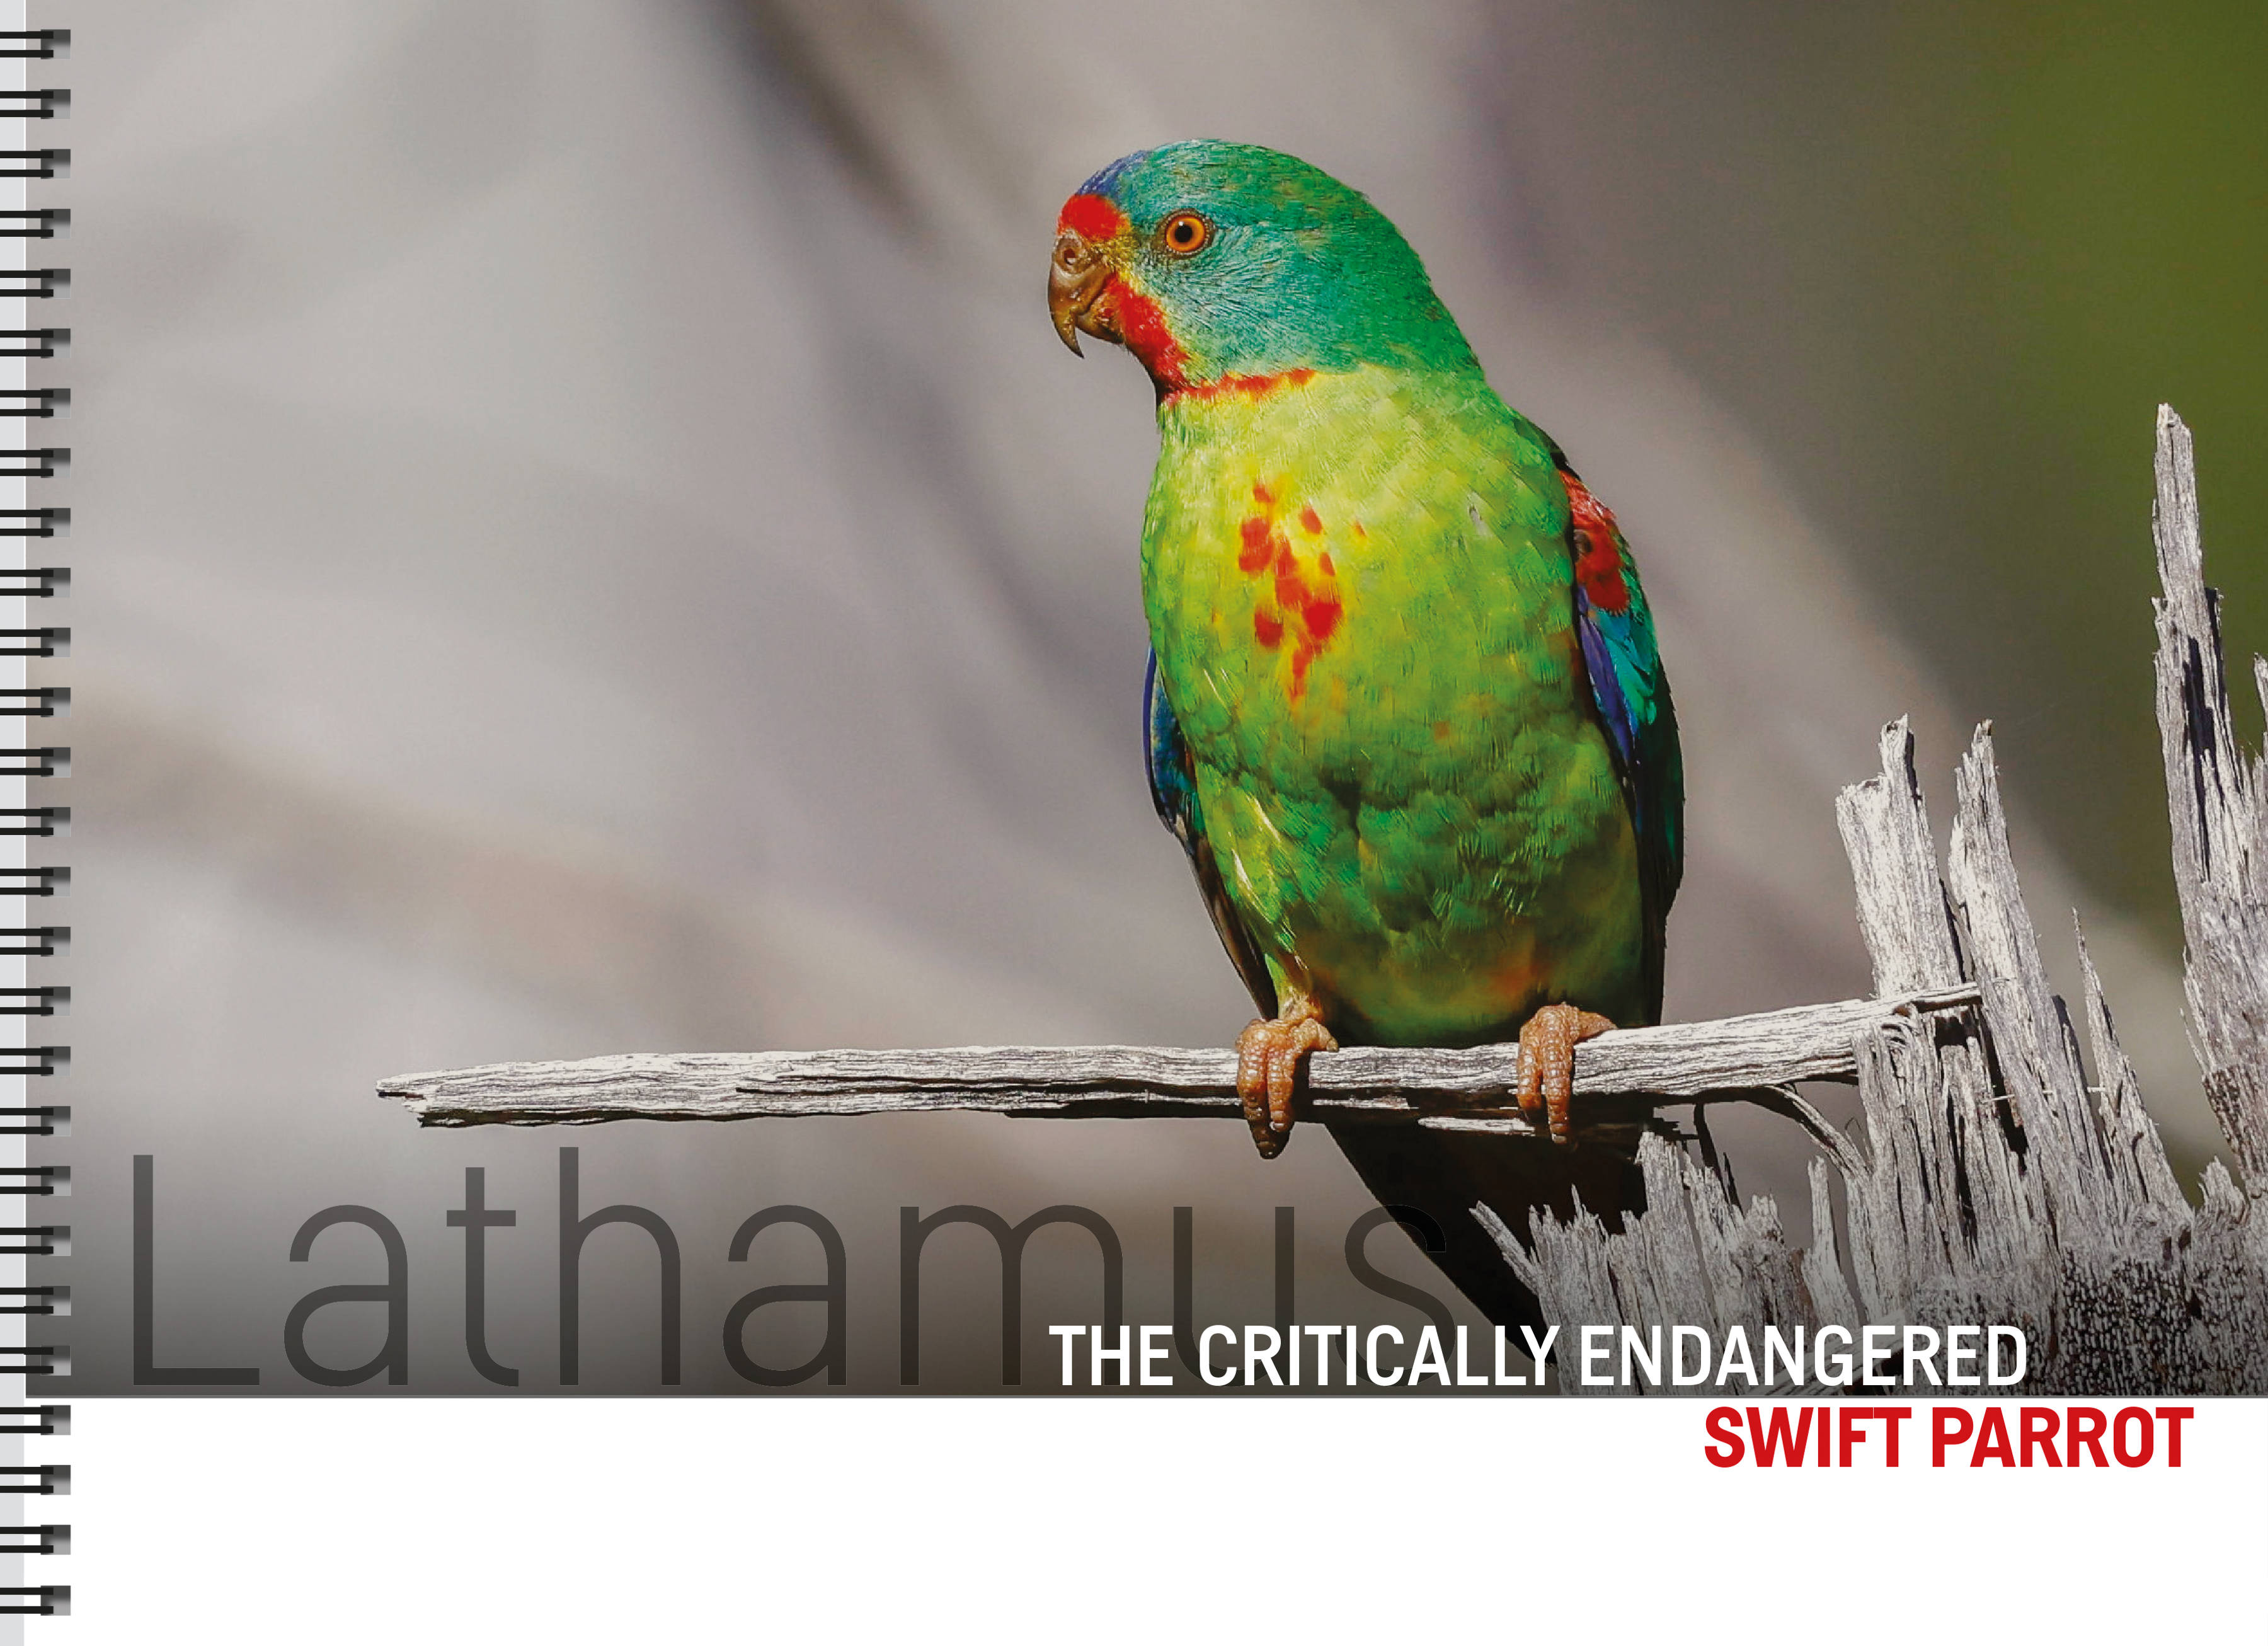 The cover of the large-format pictorial publication, Lathamus / The Critically Endangered Swift Parrot, with a single Swift Parrot perched on a dead branch. Image by Rob Blakers.